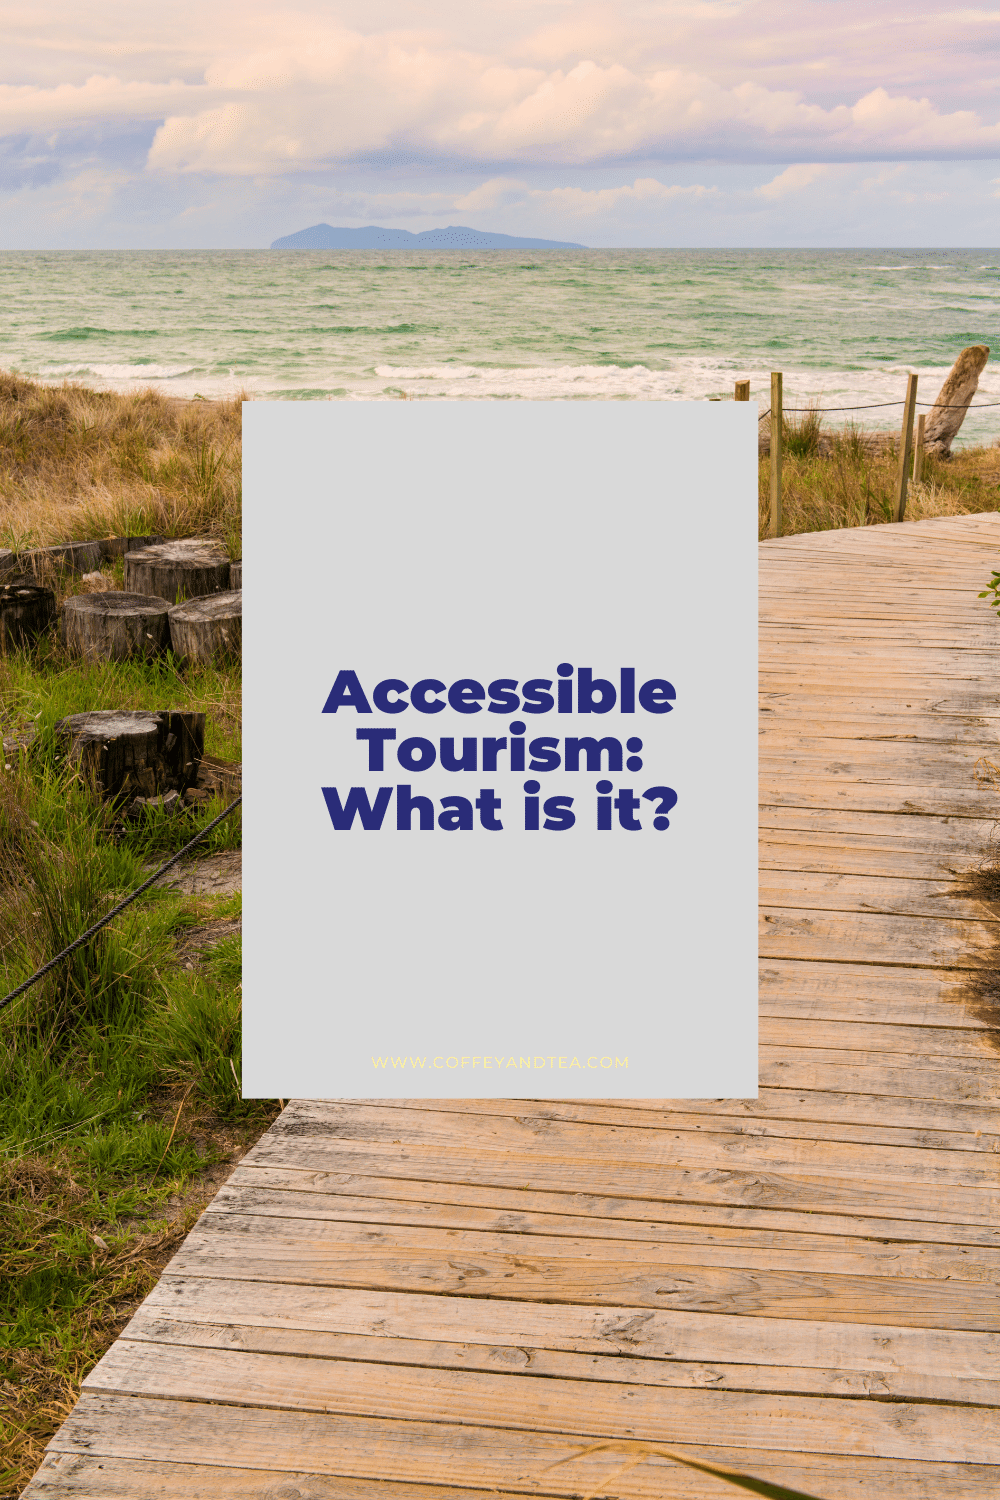 Accessible Tourism: What is it?